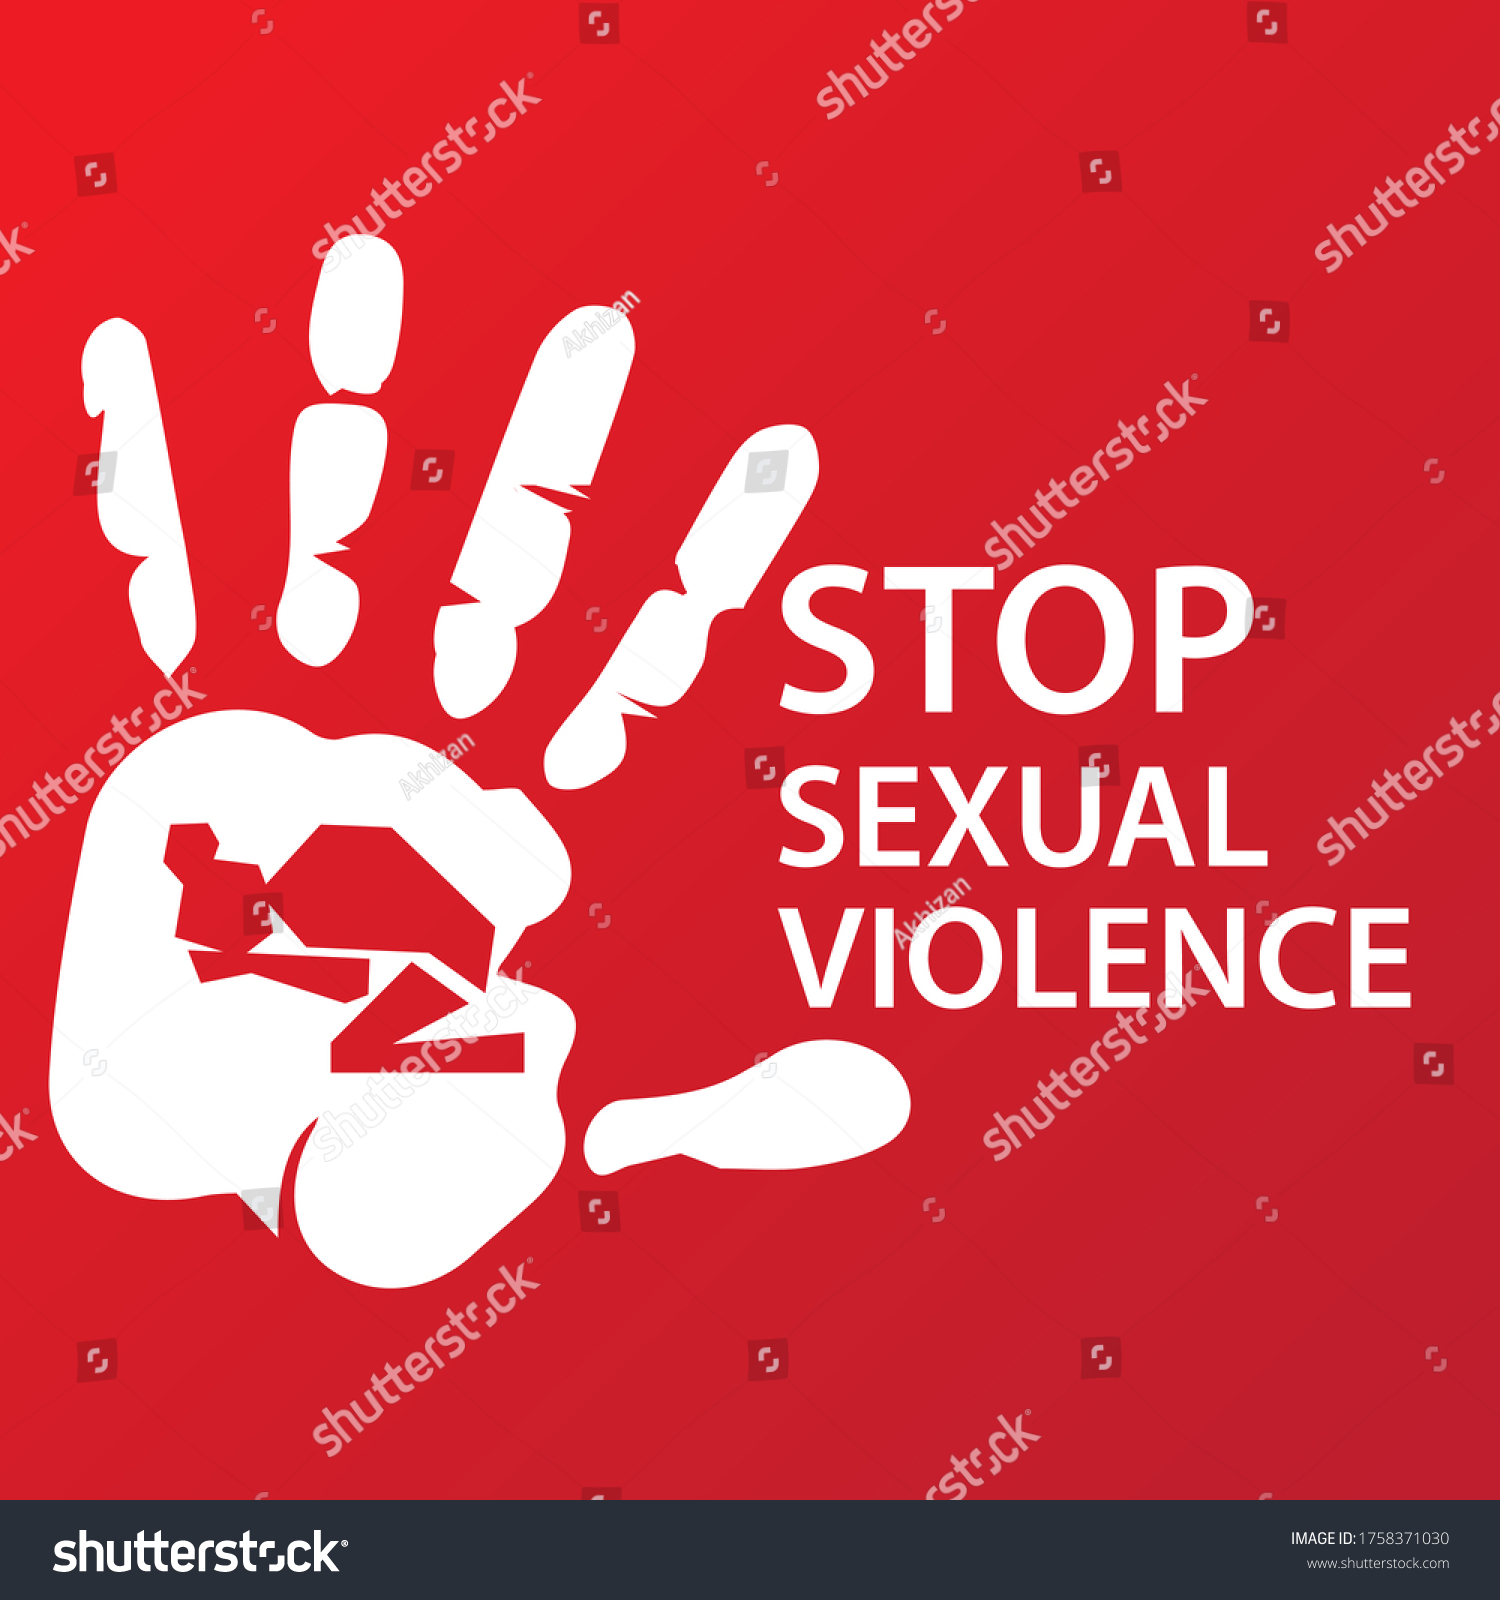 Stop Sexual Violence Conflict Stock Vector Royalty Free 1758371030